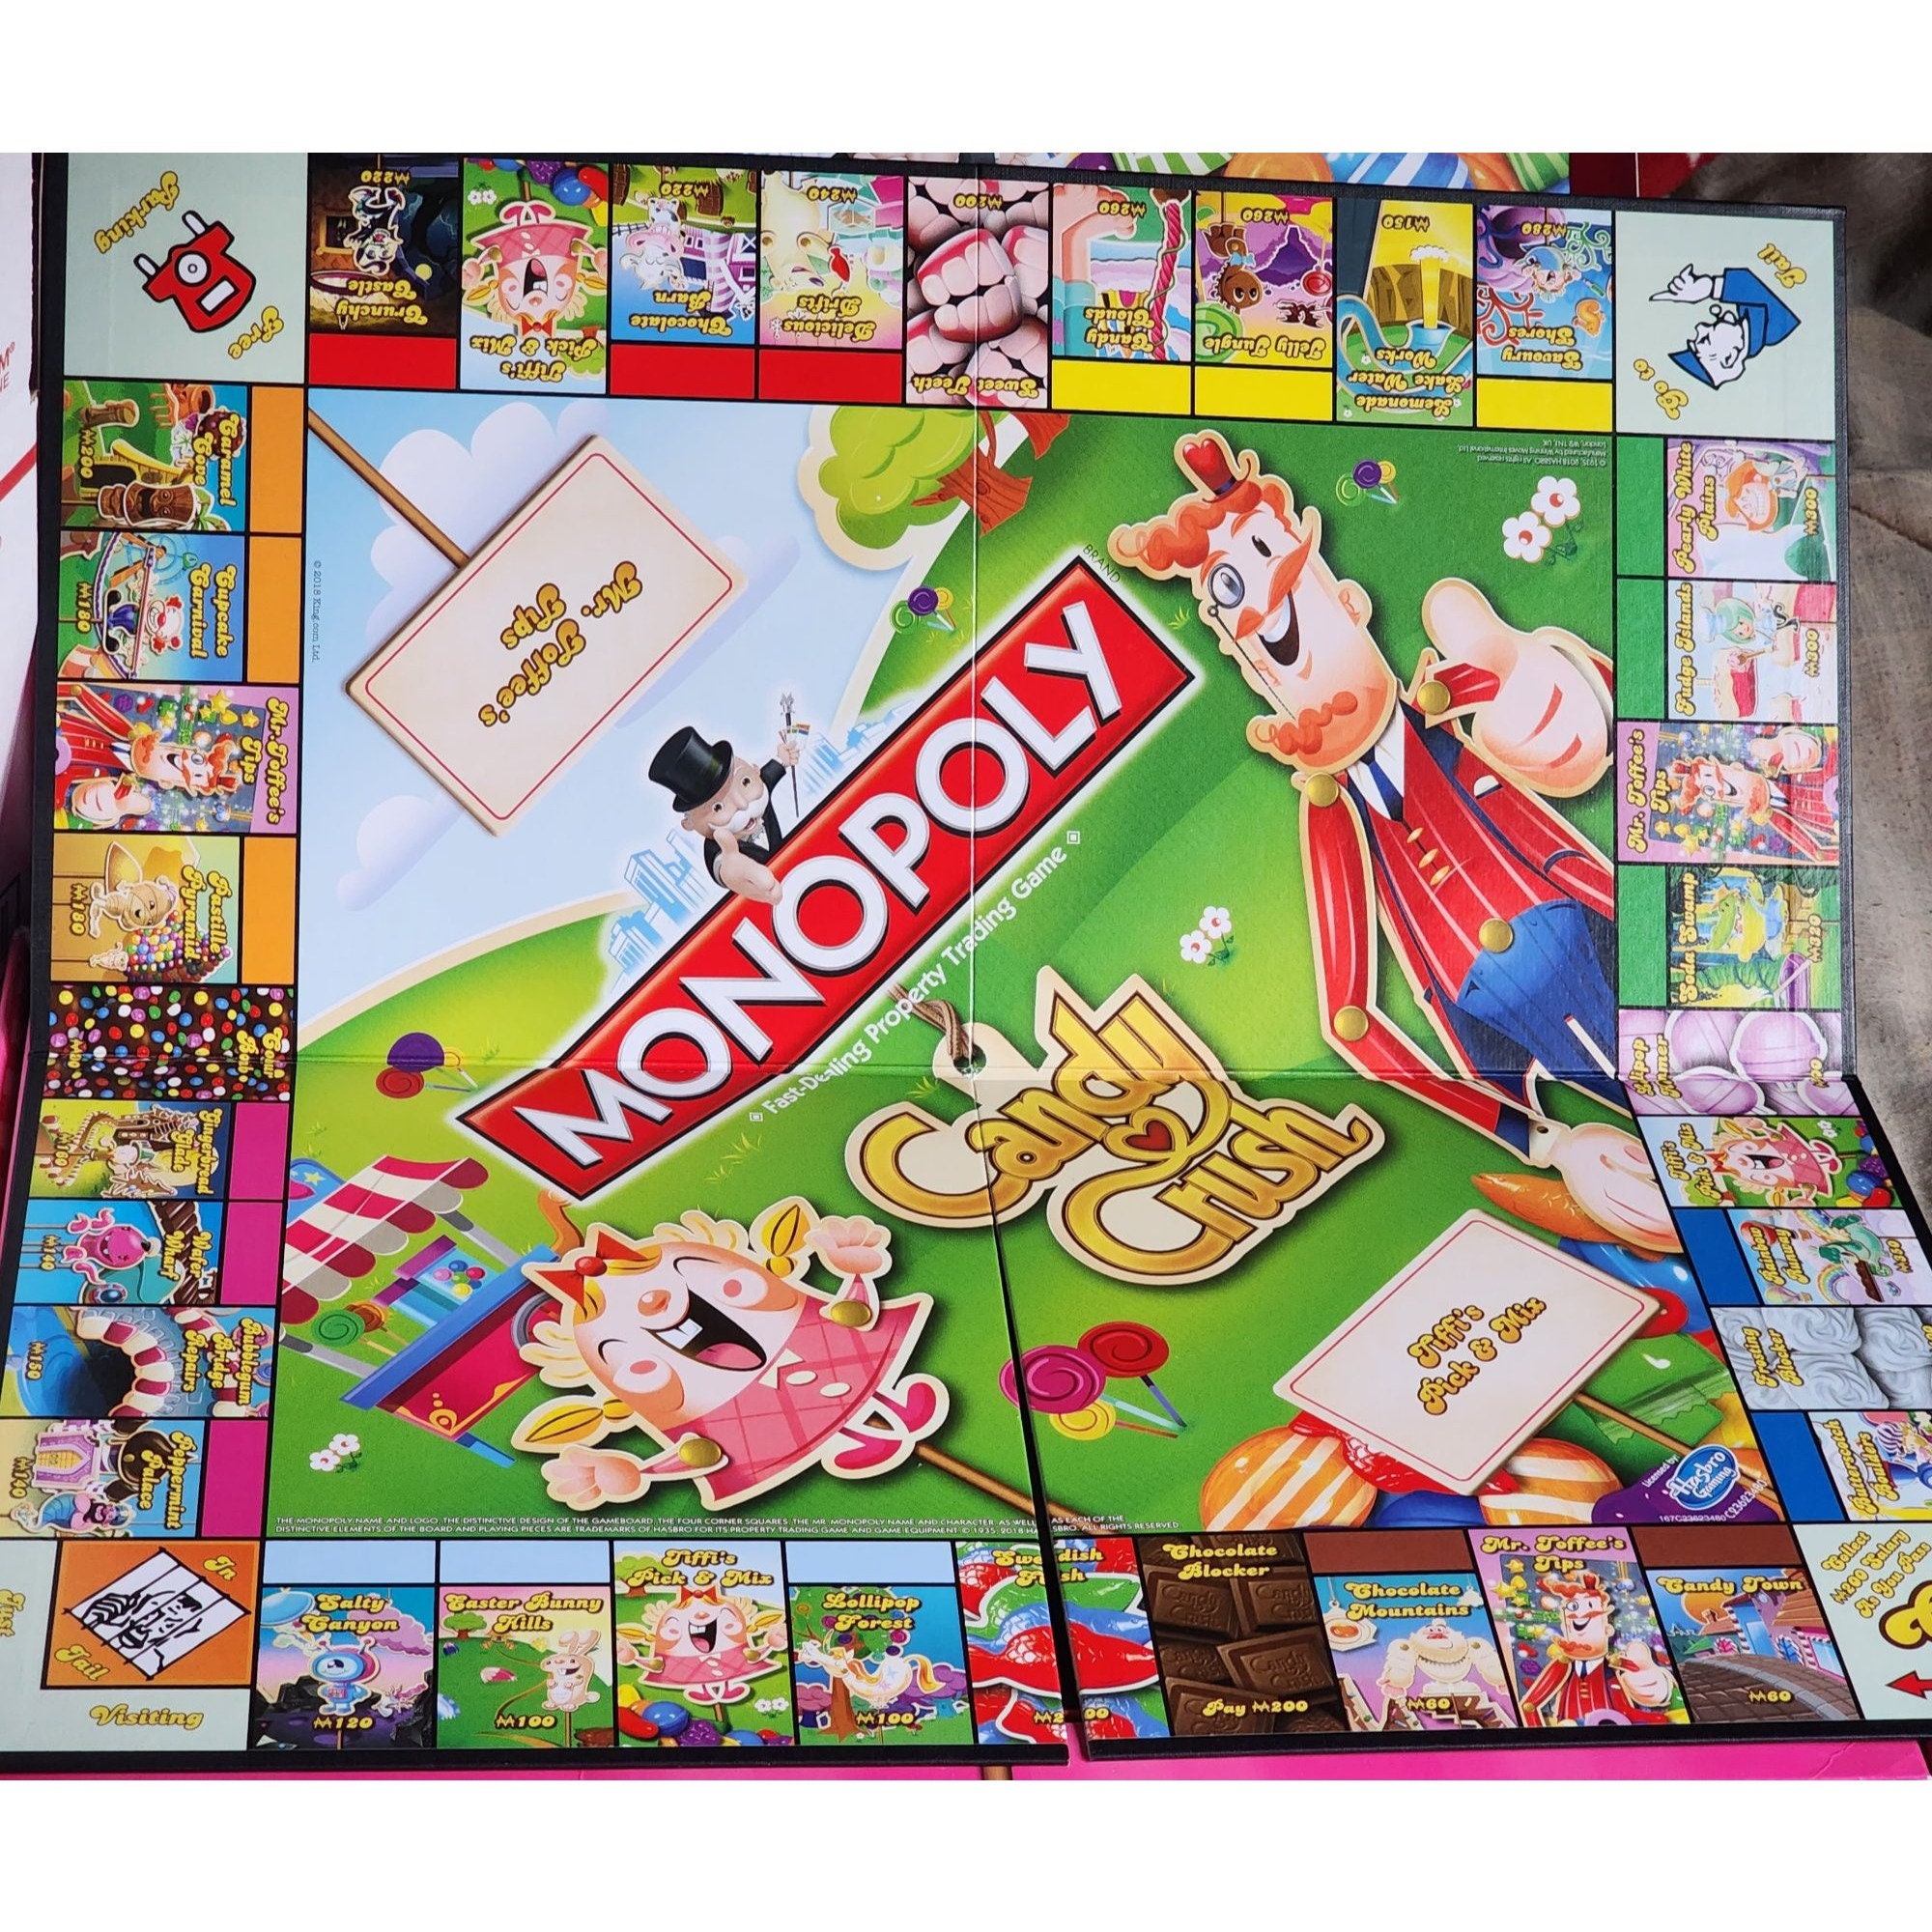 Candy Crush: The Boardgame, Board Game